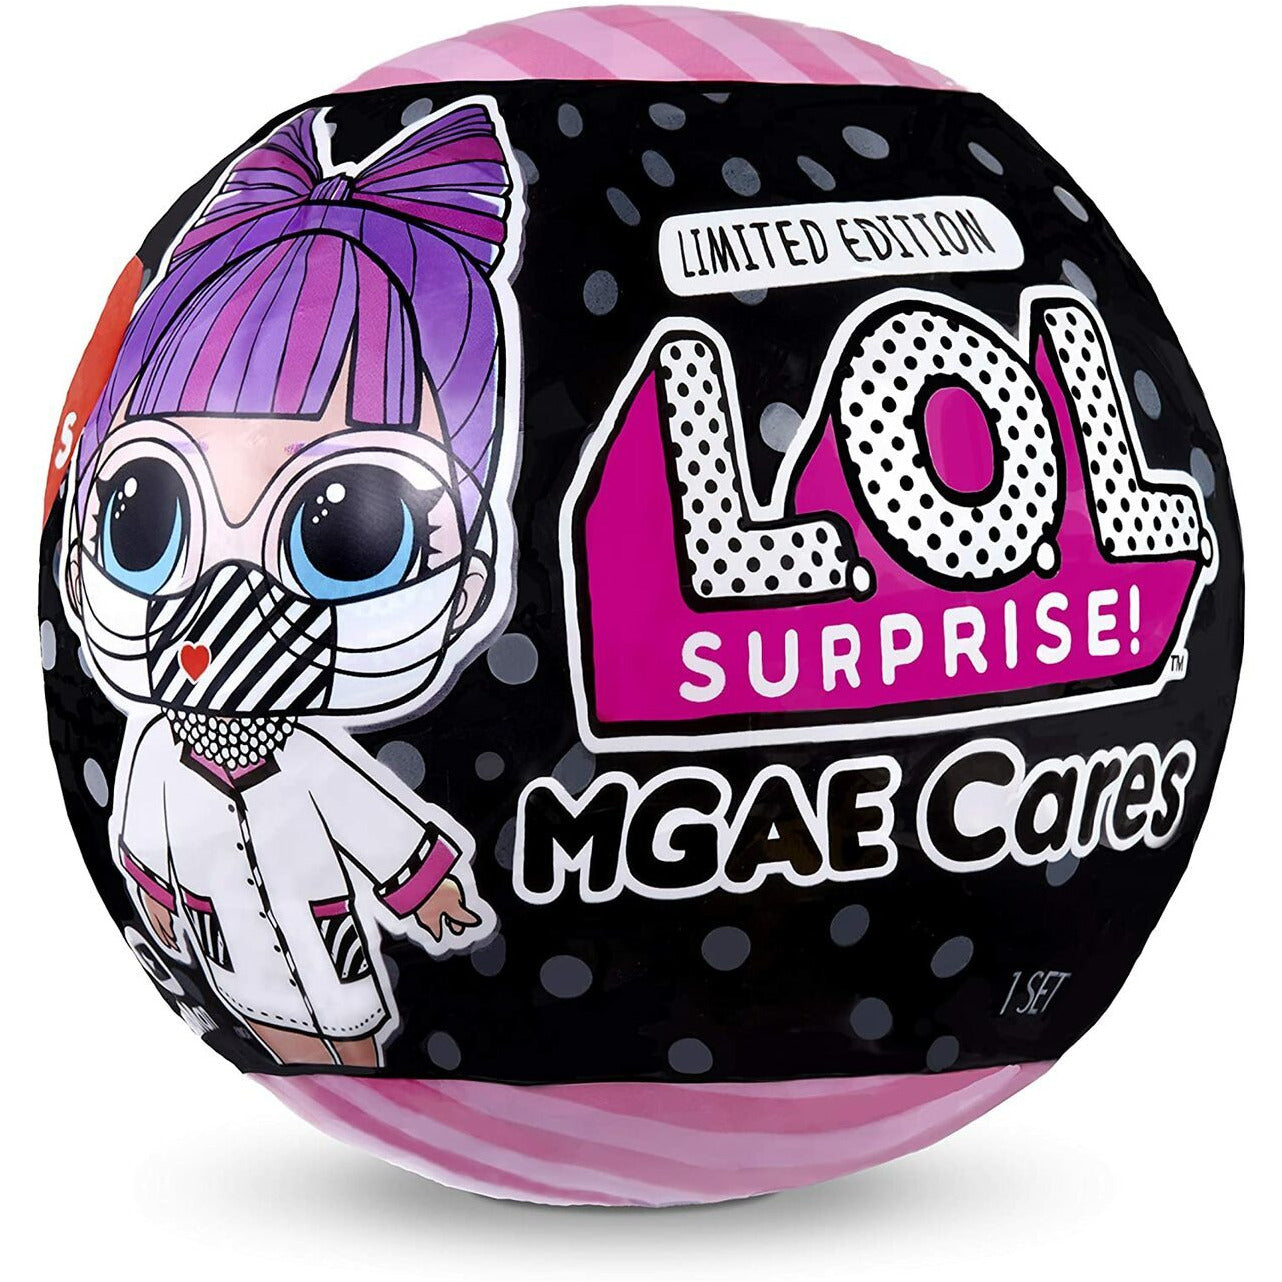 L.O.L. Surprise! MGAE Cares Limited Edition Frontline Hero with 7 Surprises